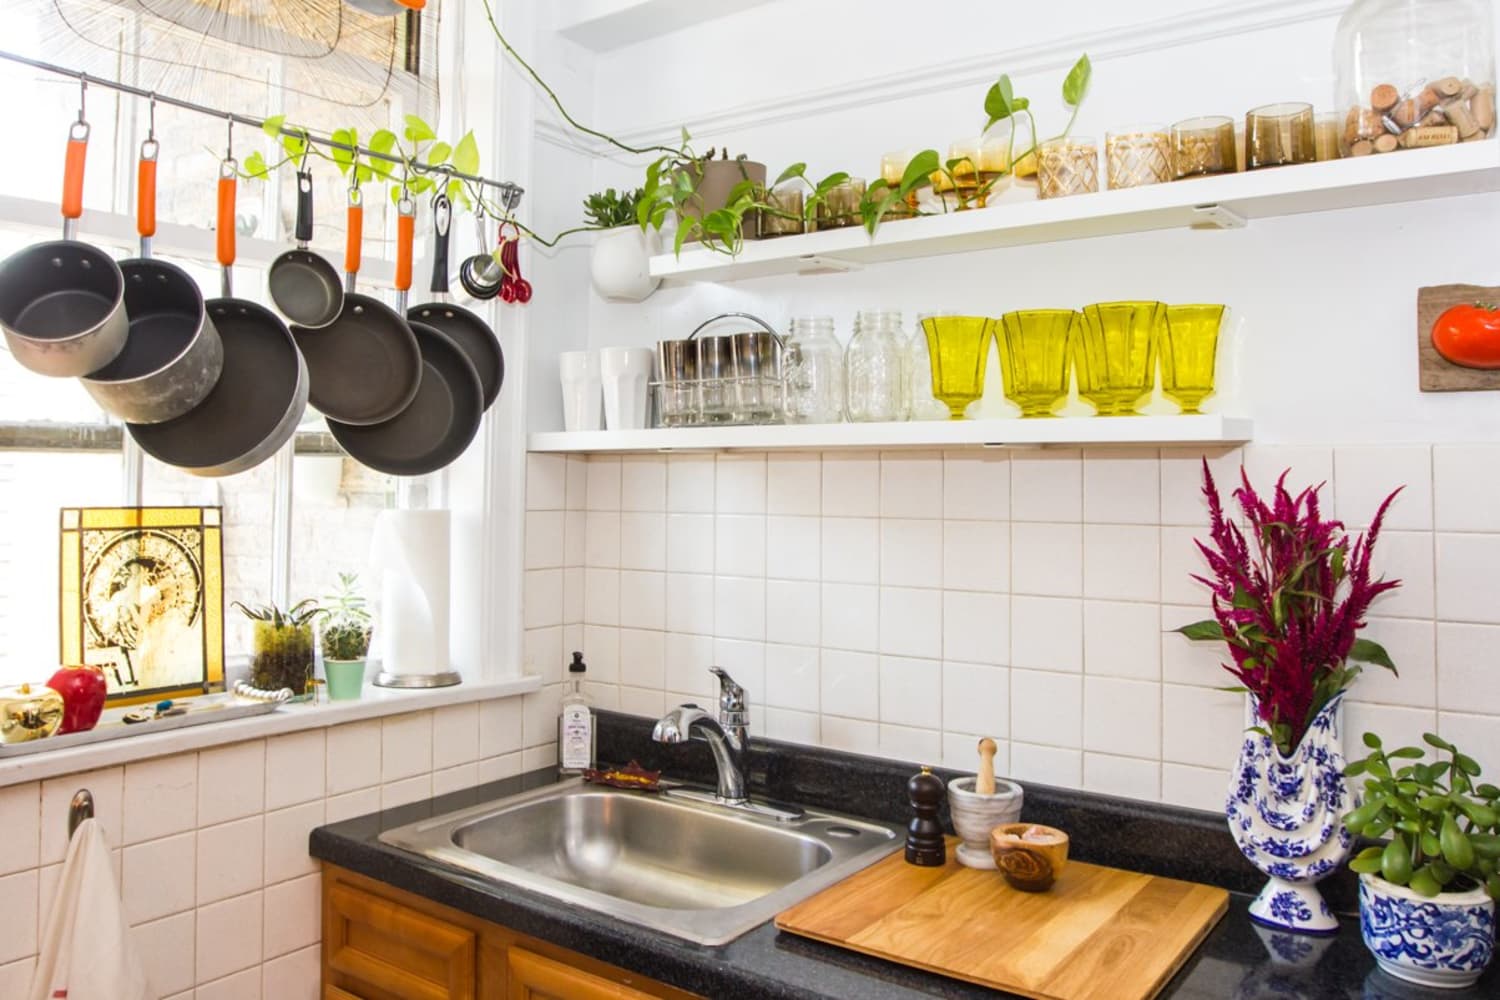 Where to Find Extra Storage Space in Your Kitchen